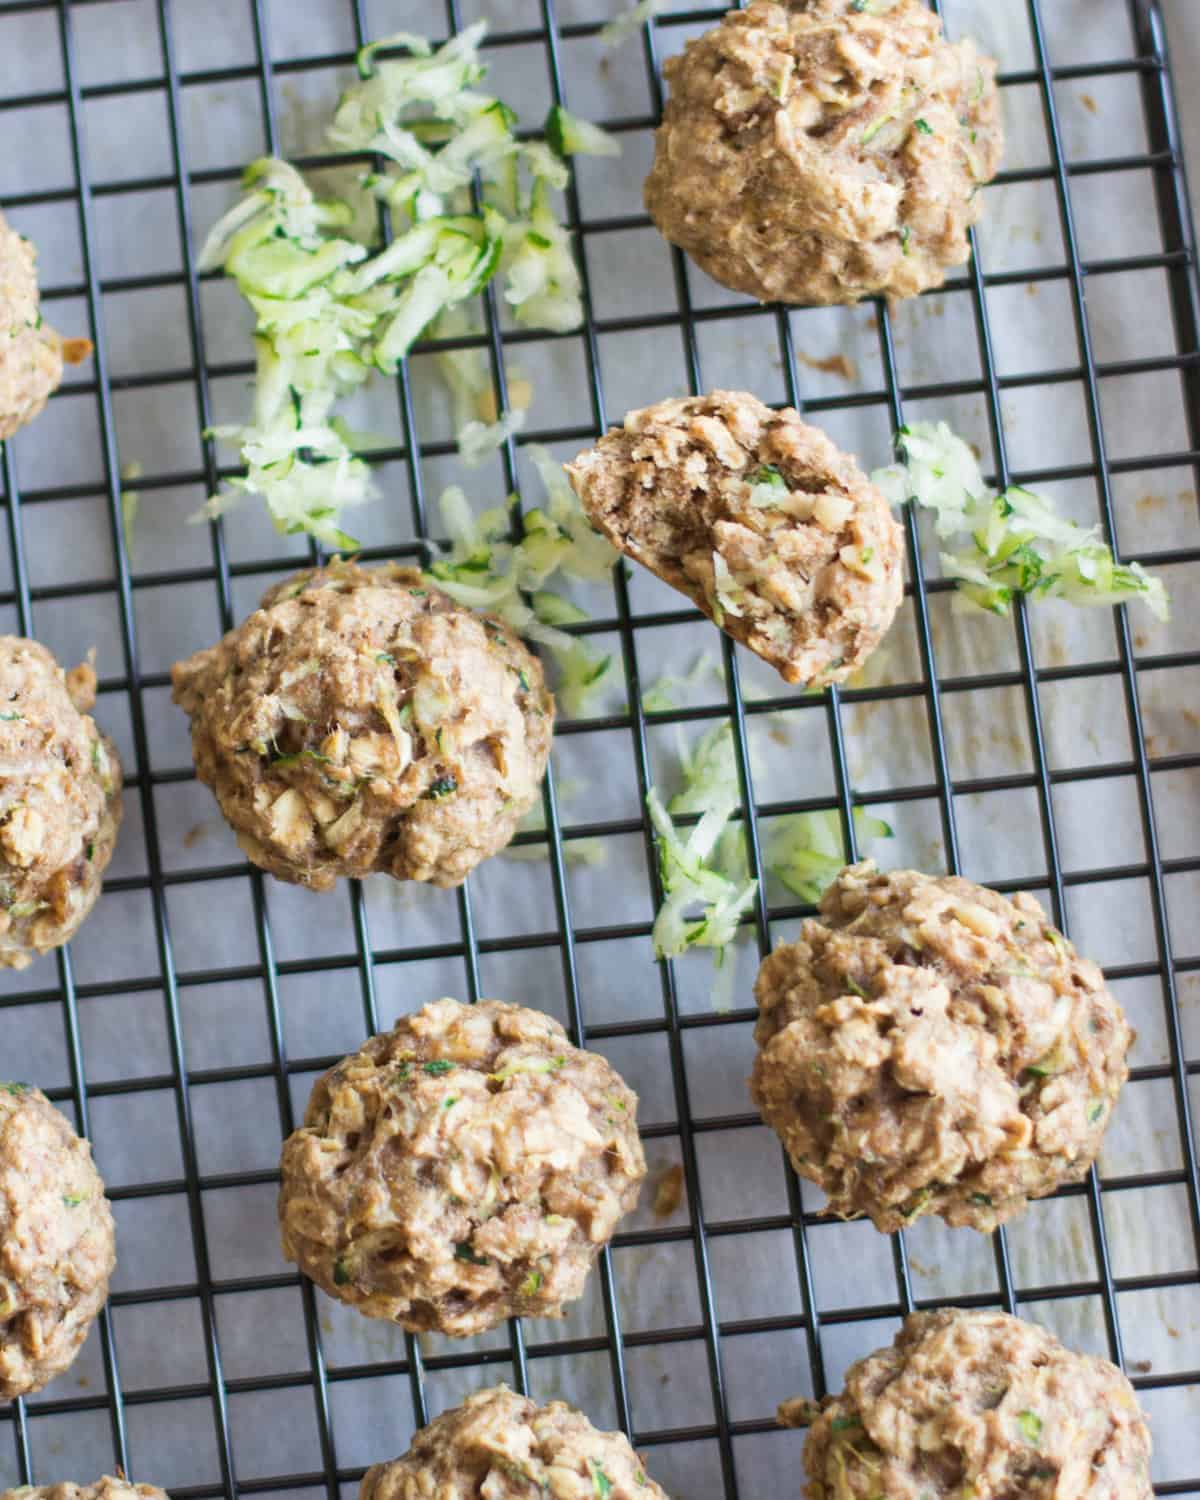 baked cookies on a wire rack with shredded zucchini